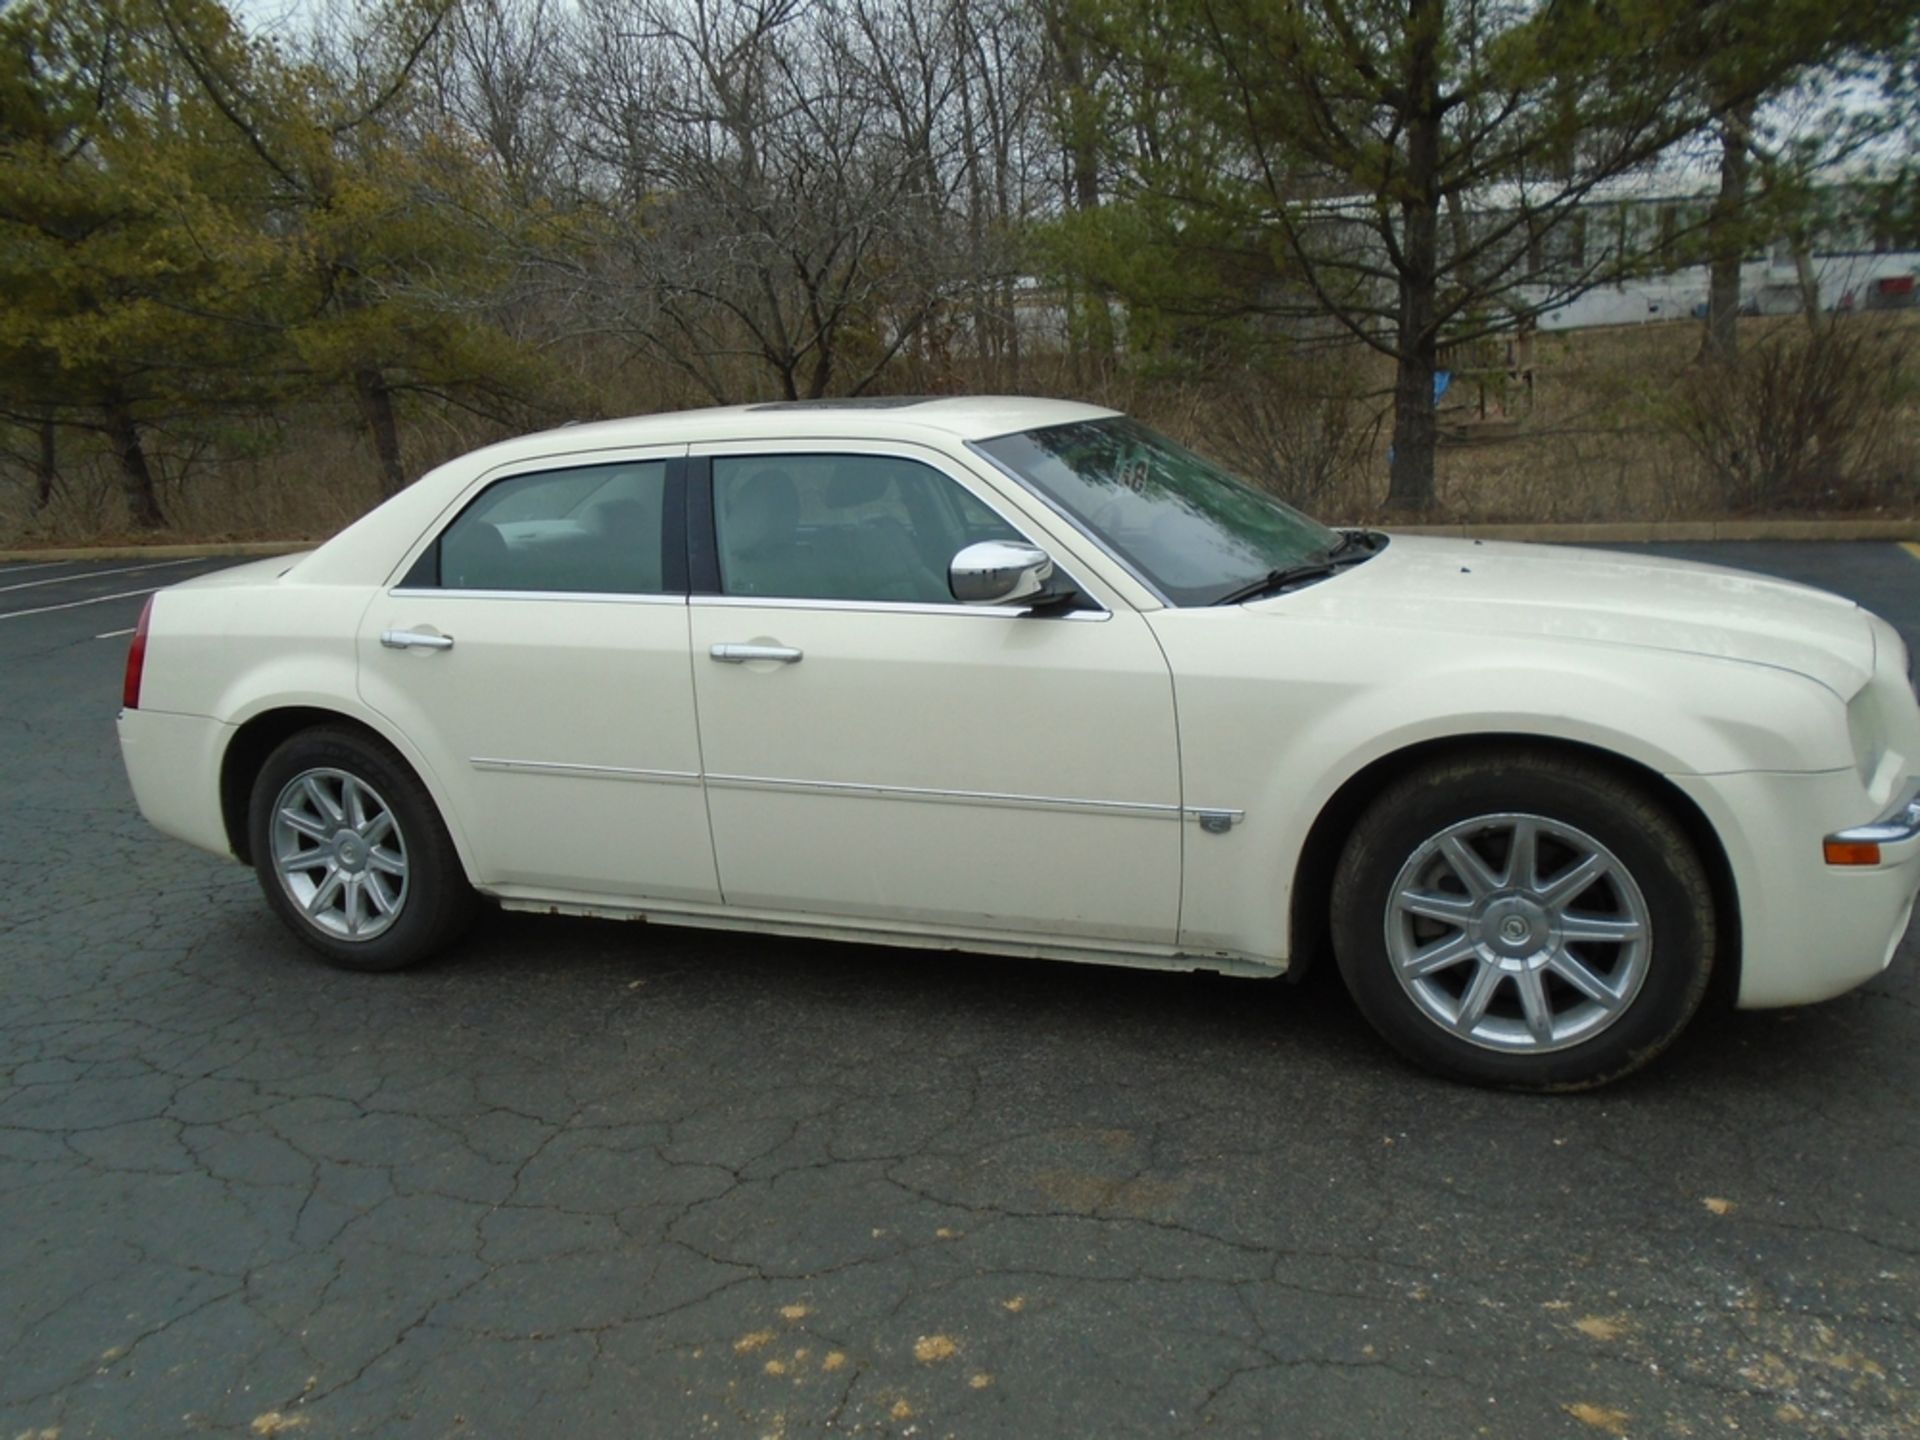 2005 Chrysler 300C Leather Interior Brand New Tires Full Spare Tire AC, Navigation, Blue Tooth - Image 3 of 13